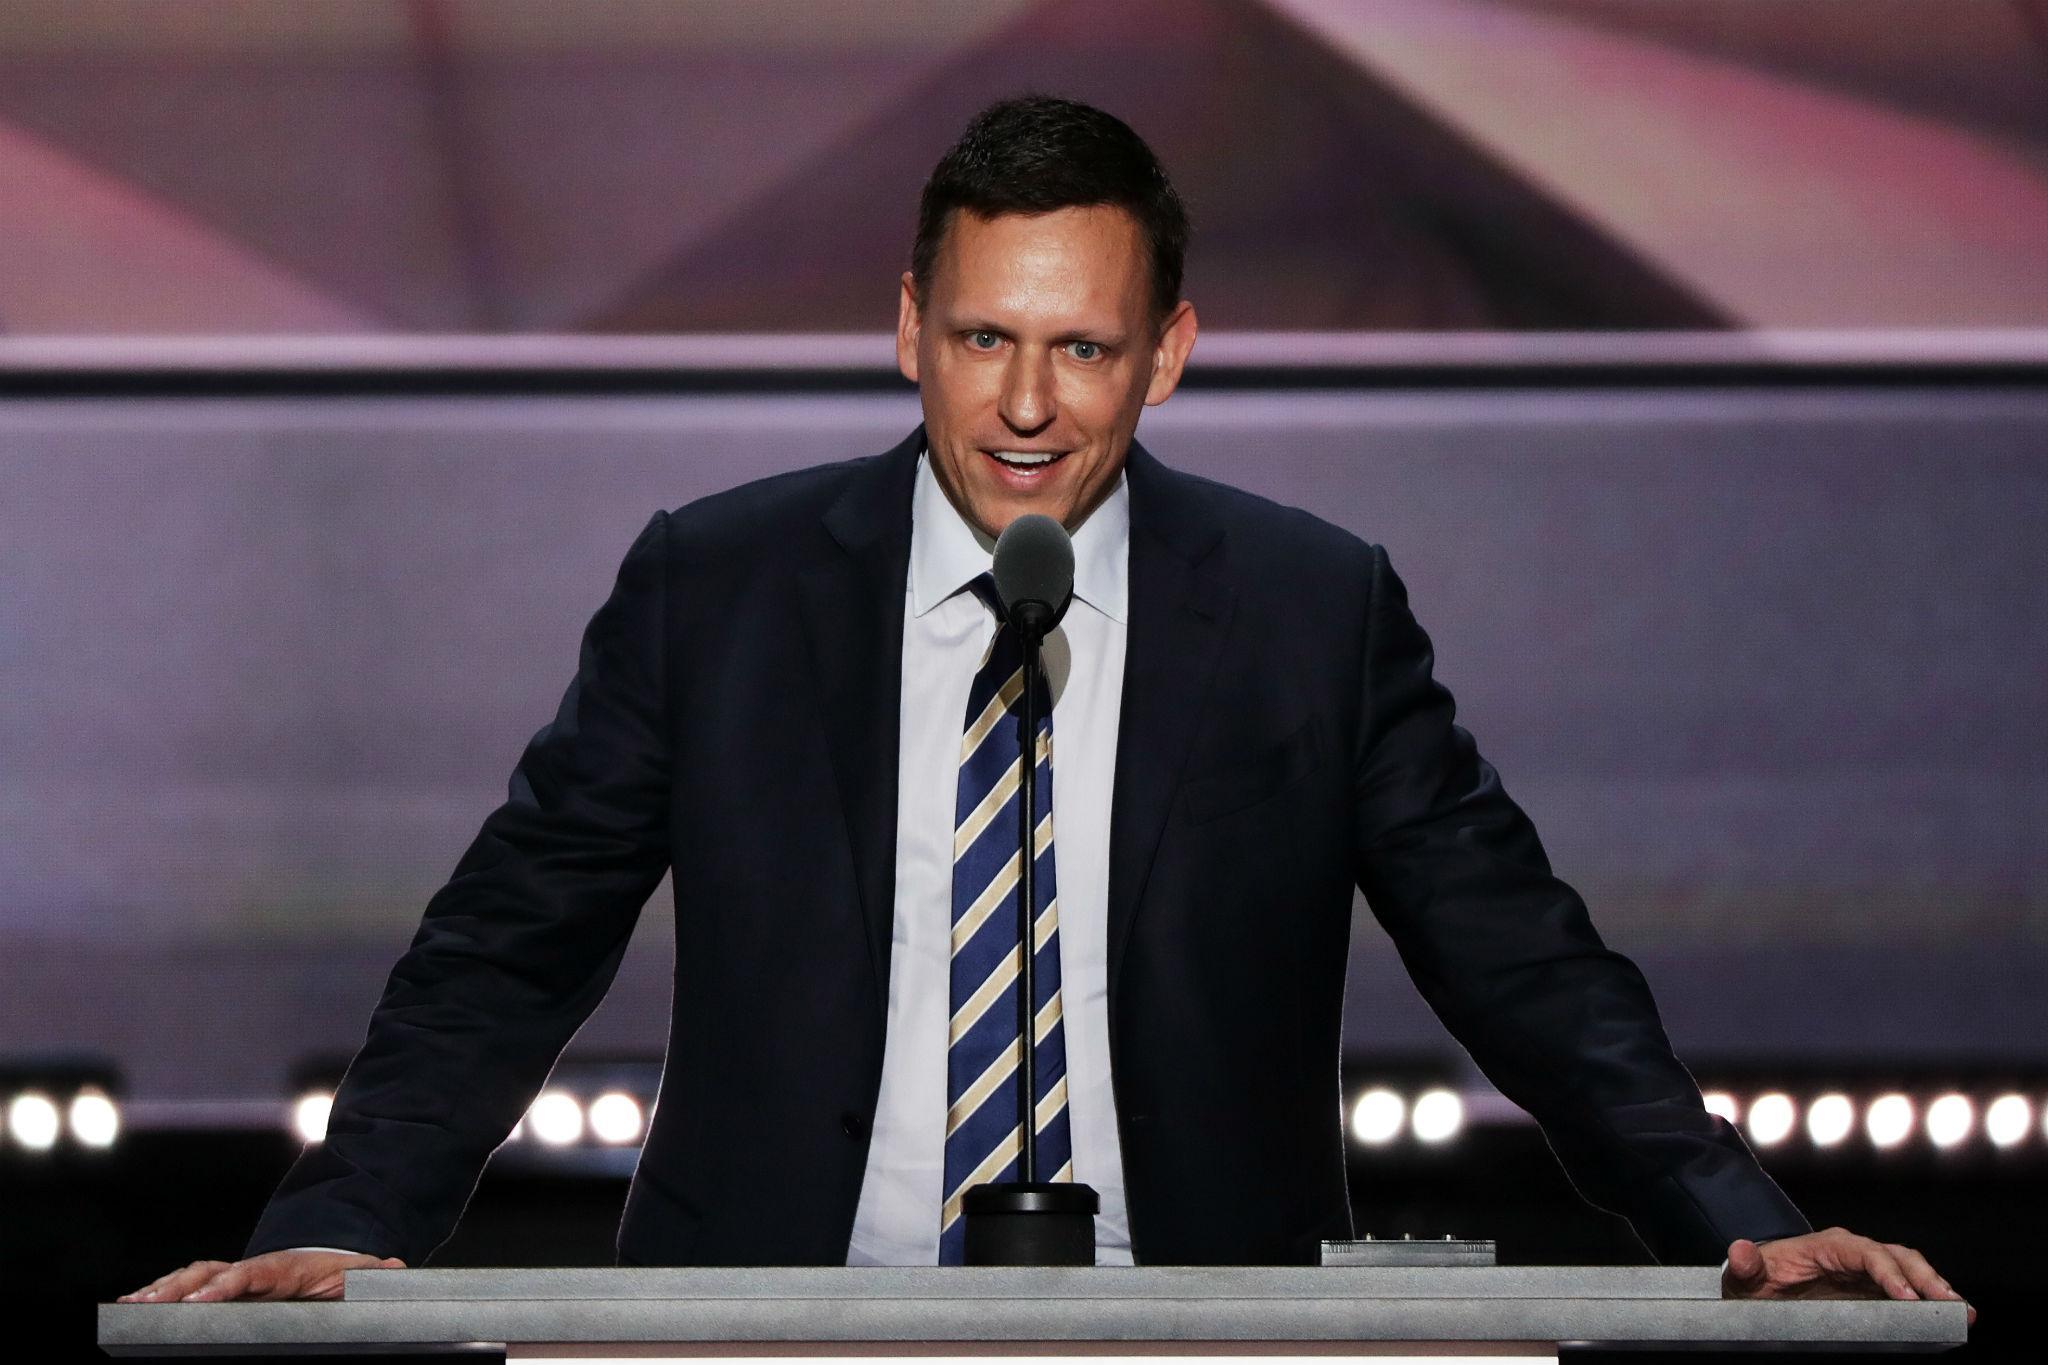 Mr Thiel, 48, was recently revealed as the secret donor behind Hulk Hogan's lawsuit against Gawker